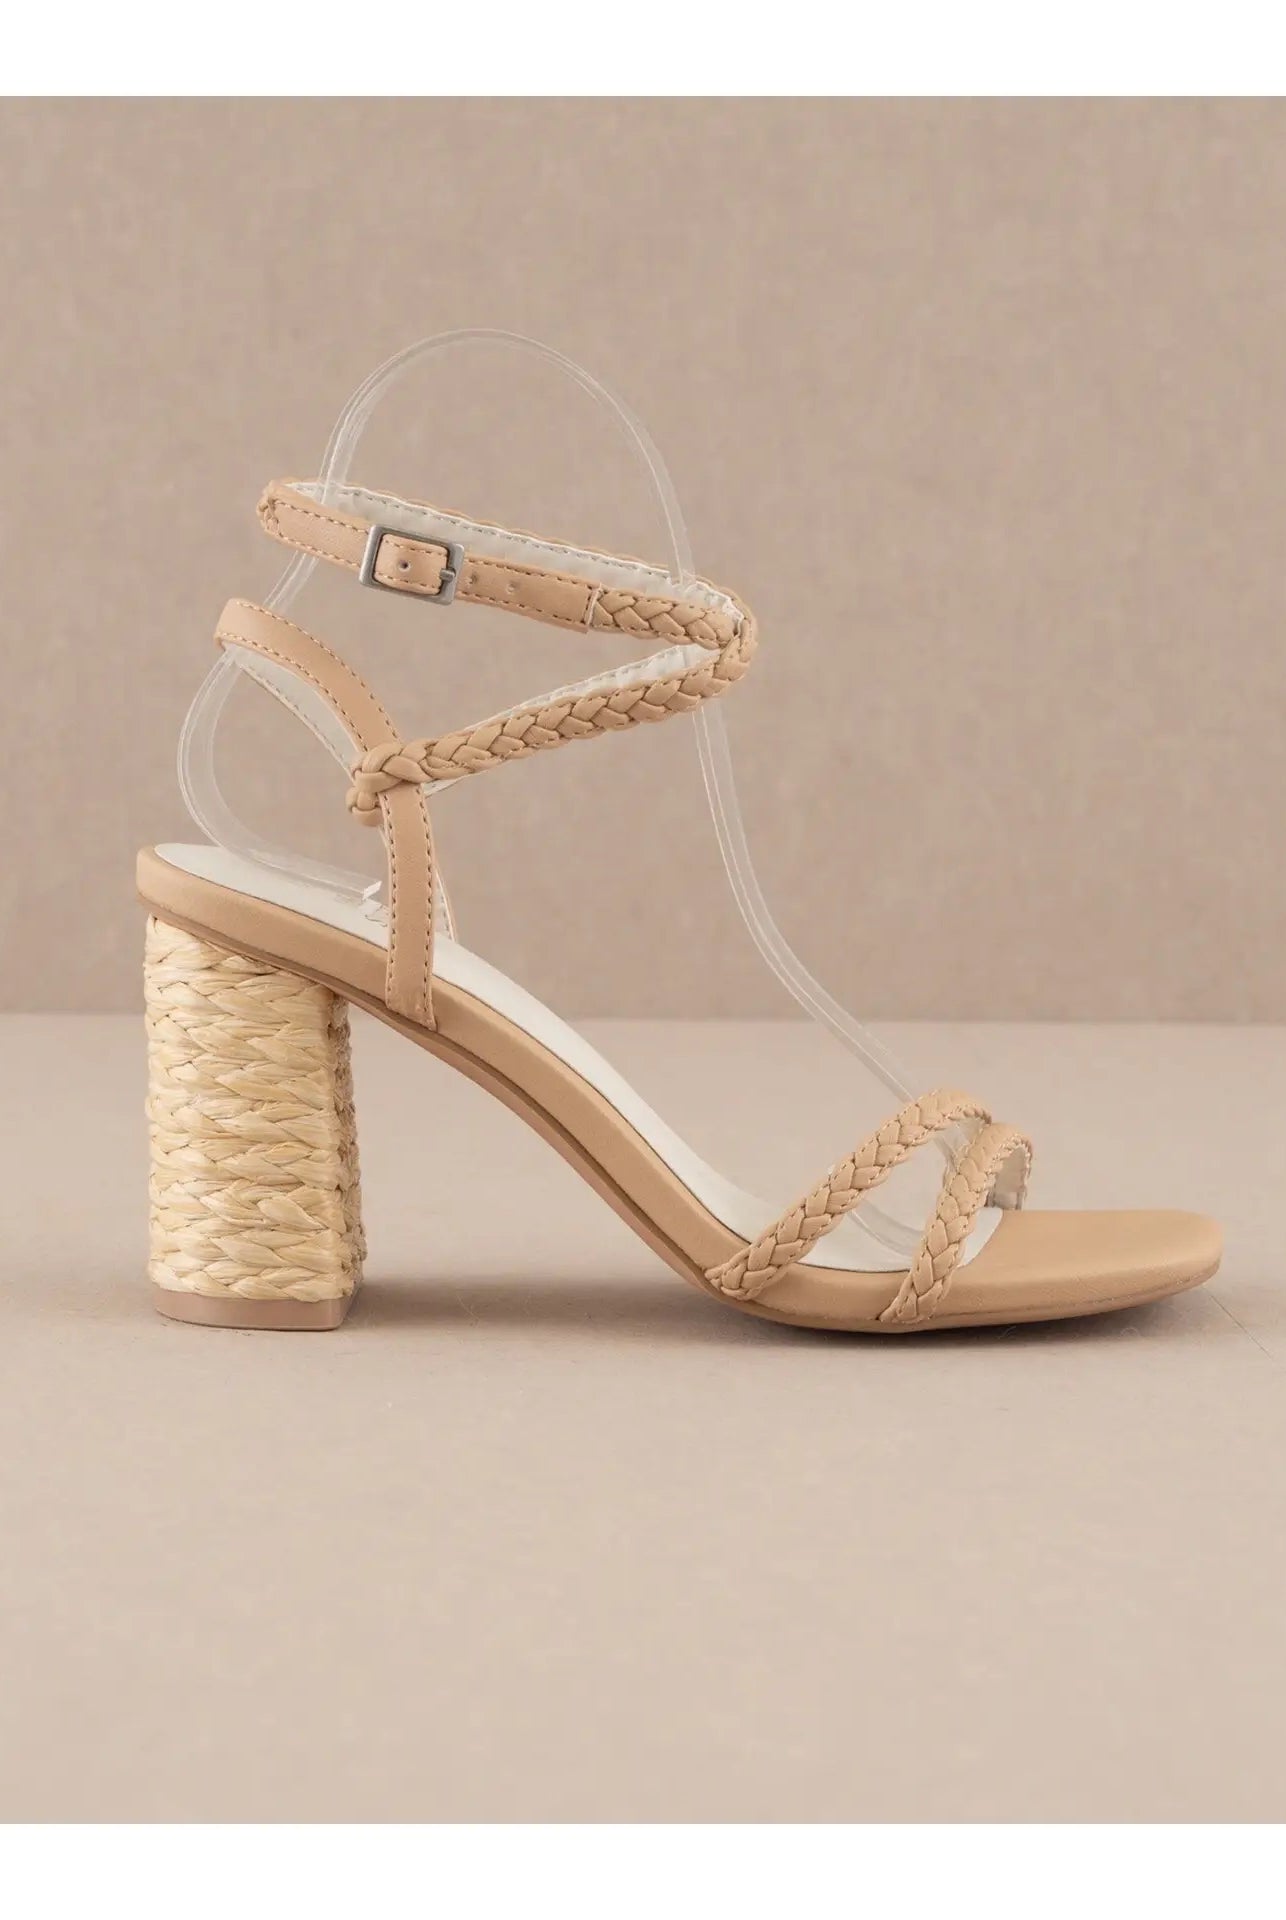 Naturally Neutral Sandal-270 Shoes-The Lovely Closet-The Lovely Closet, Women's Fashion Boutique in Alexandria, KY